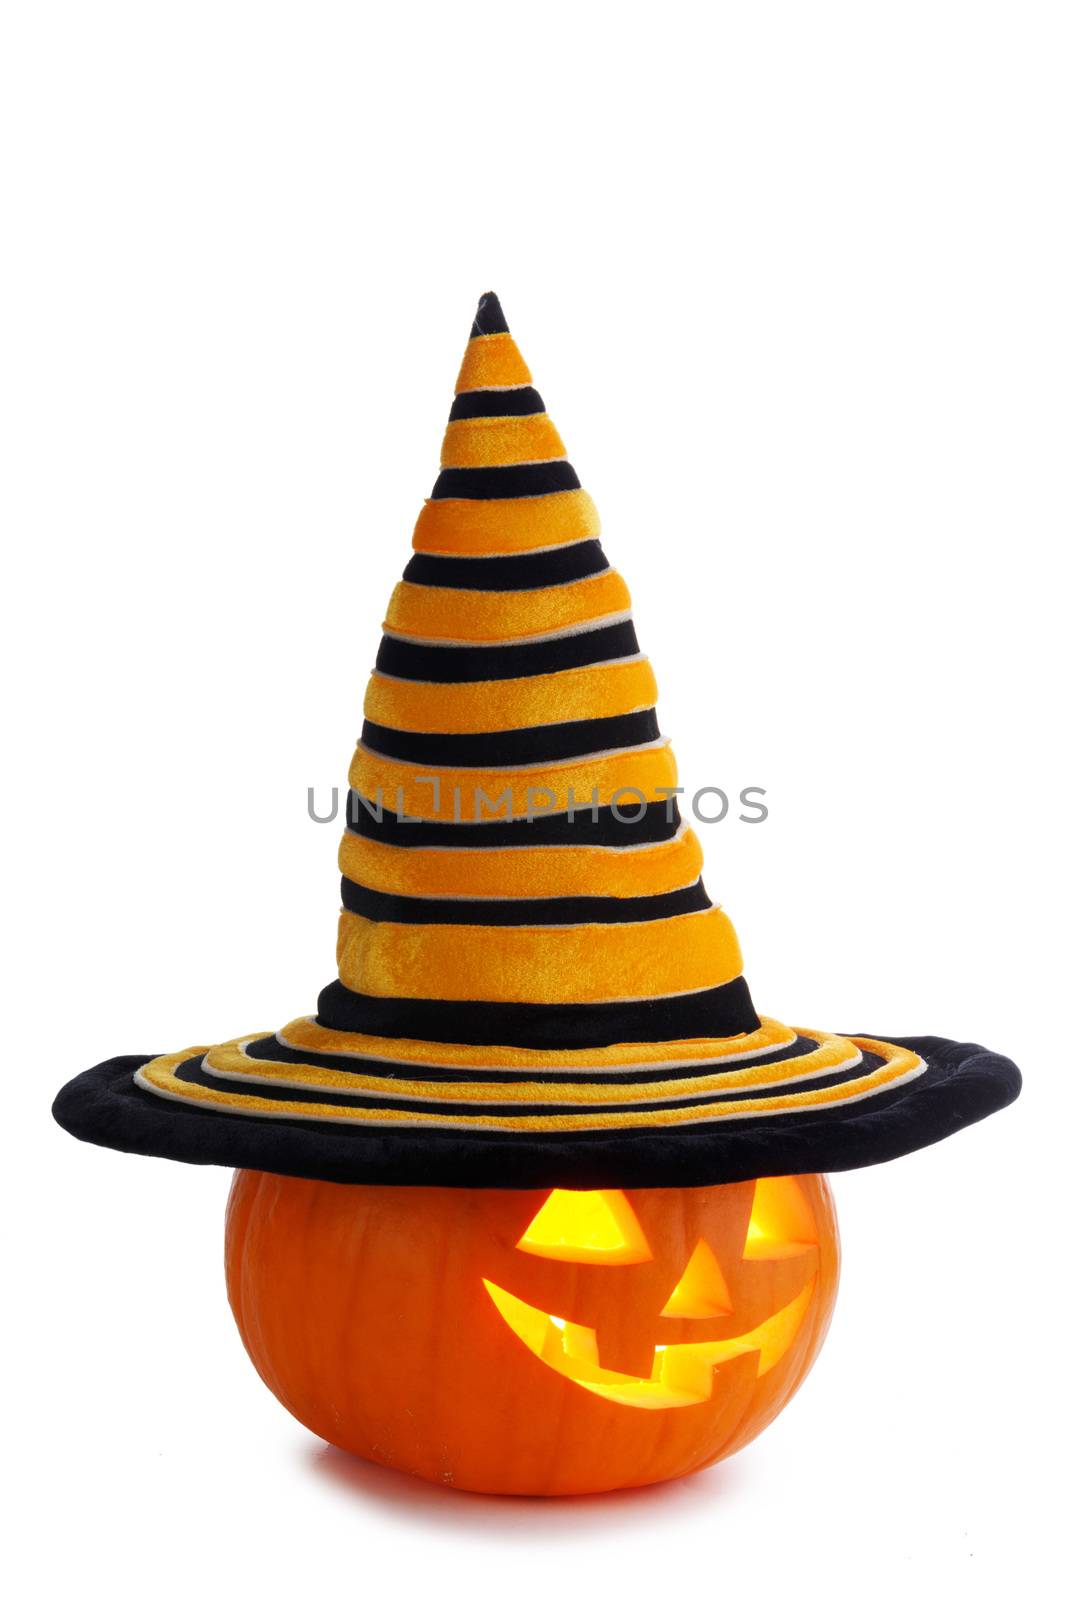 Halloween pumpkin in witches hat by Yellowj